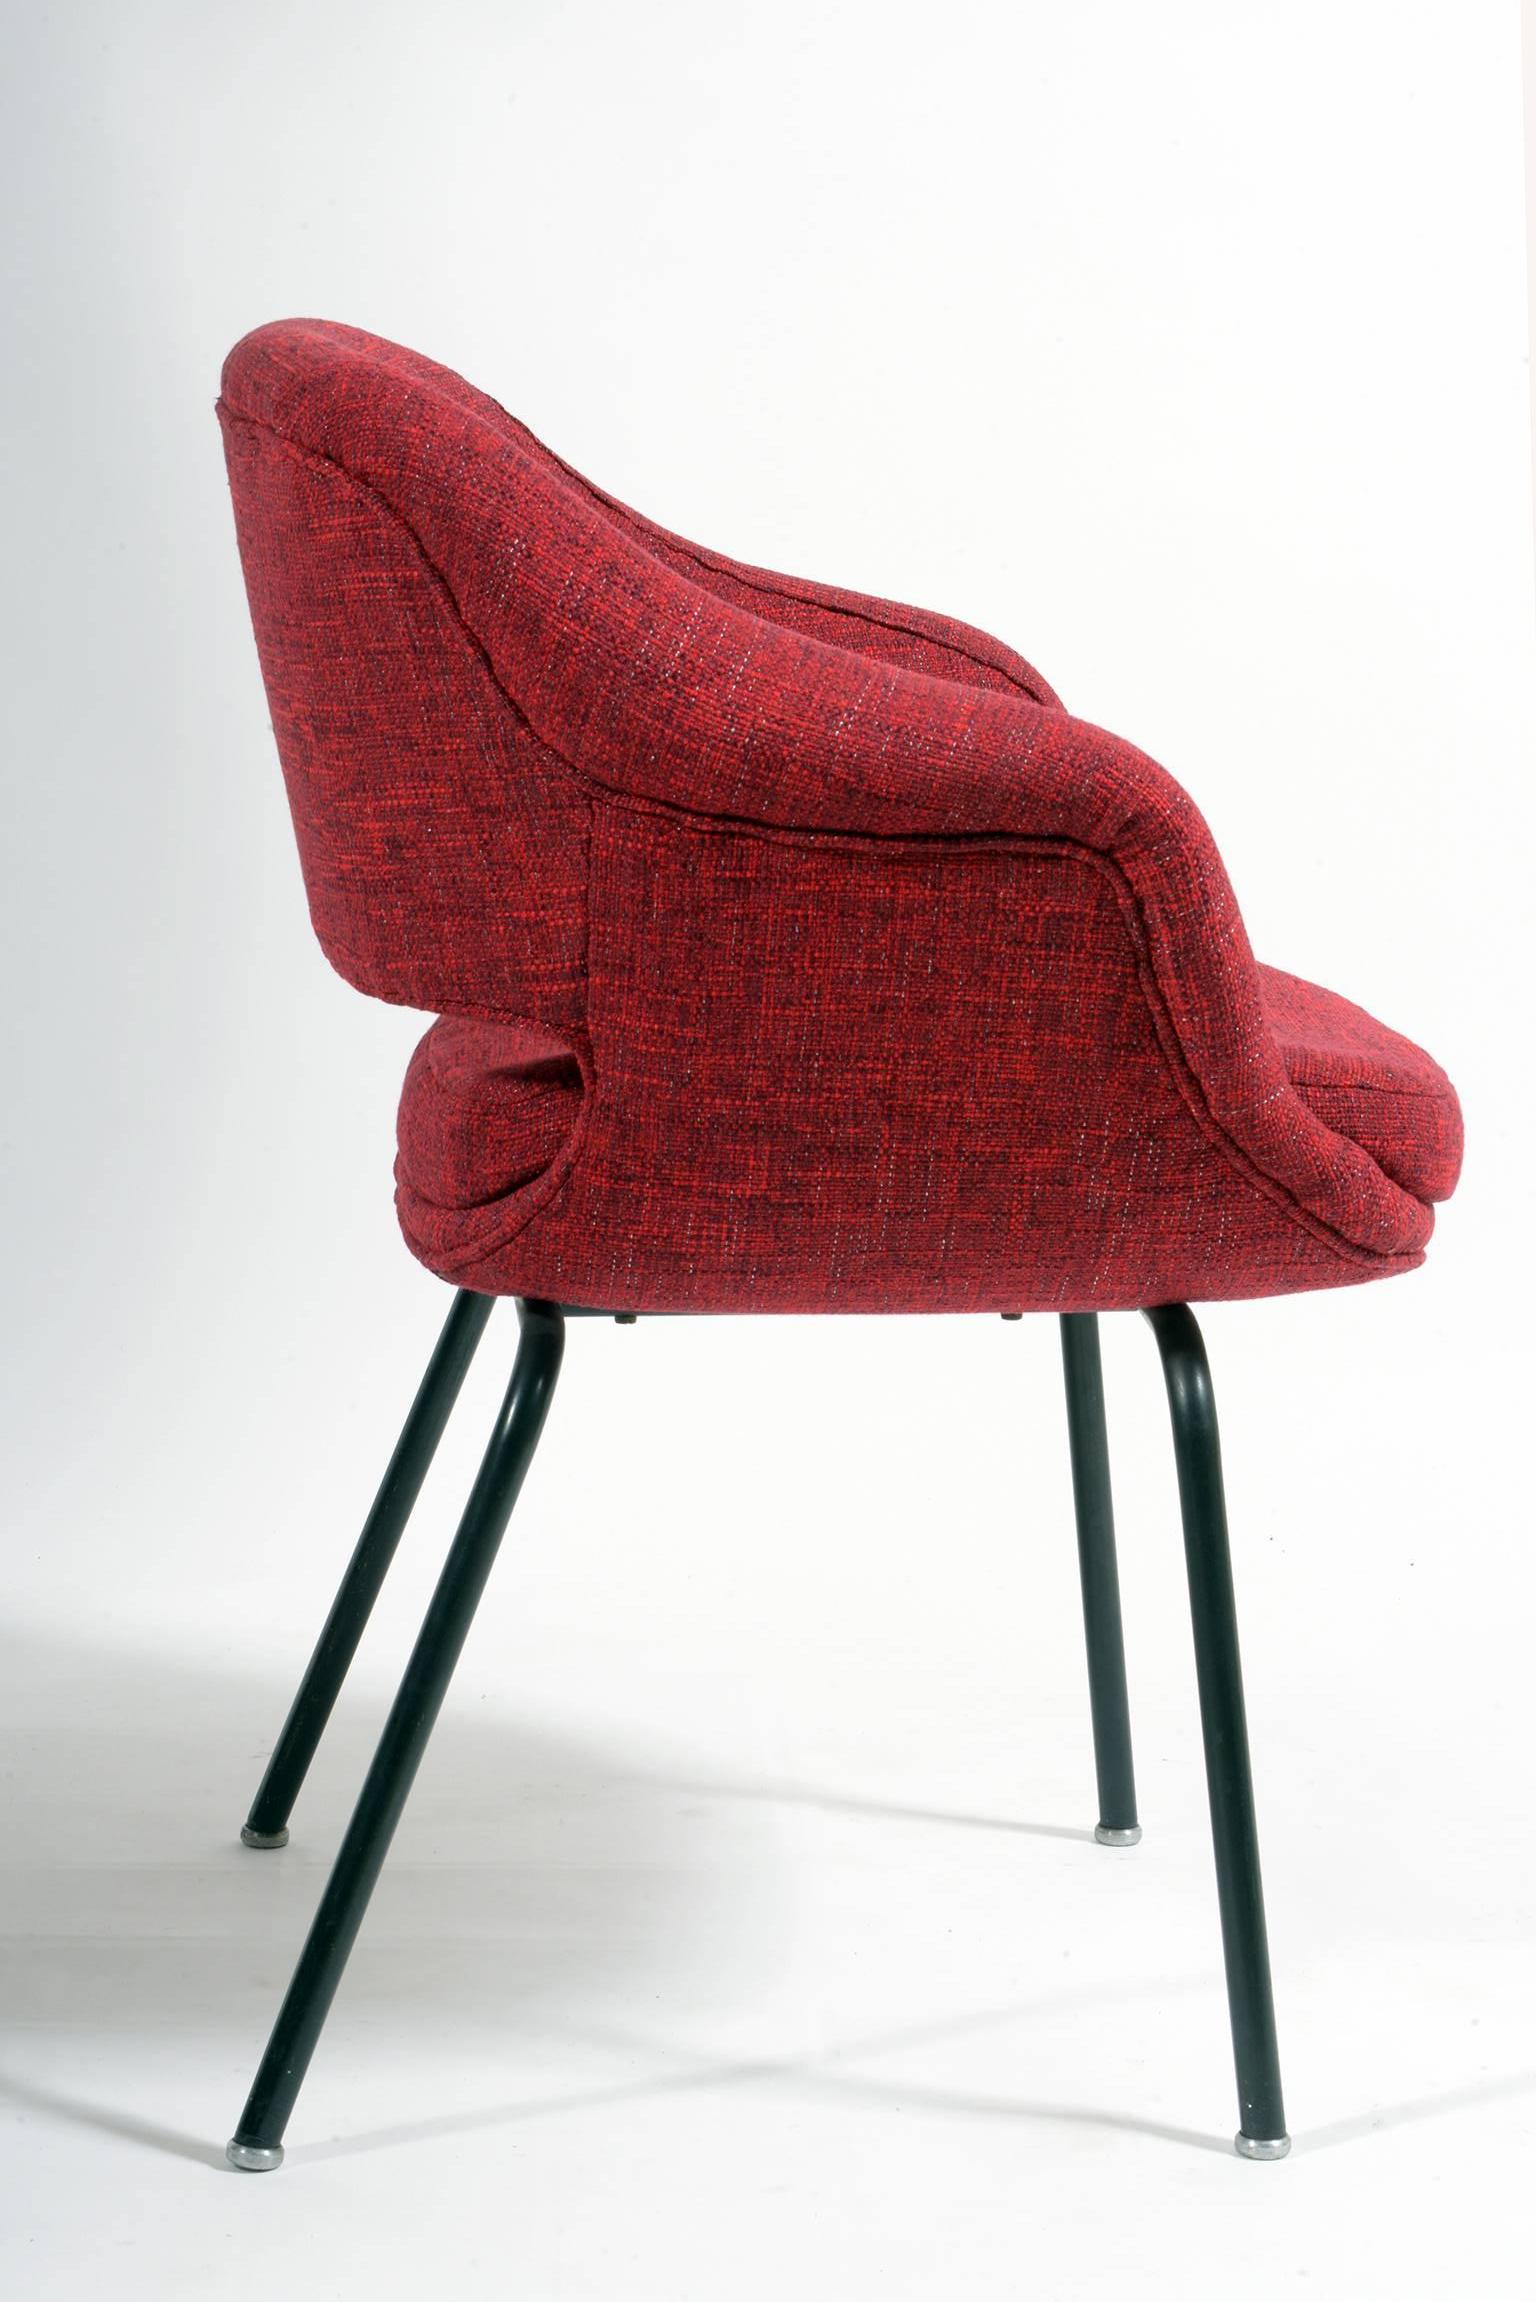 Pair of little armchairs covered in red cotton fabric black metal legs.
Signed with original Cassina label Designed by Olli Mannemaa
Publiched Domus  February 1963